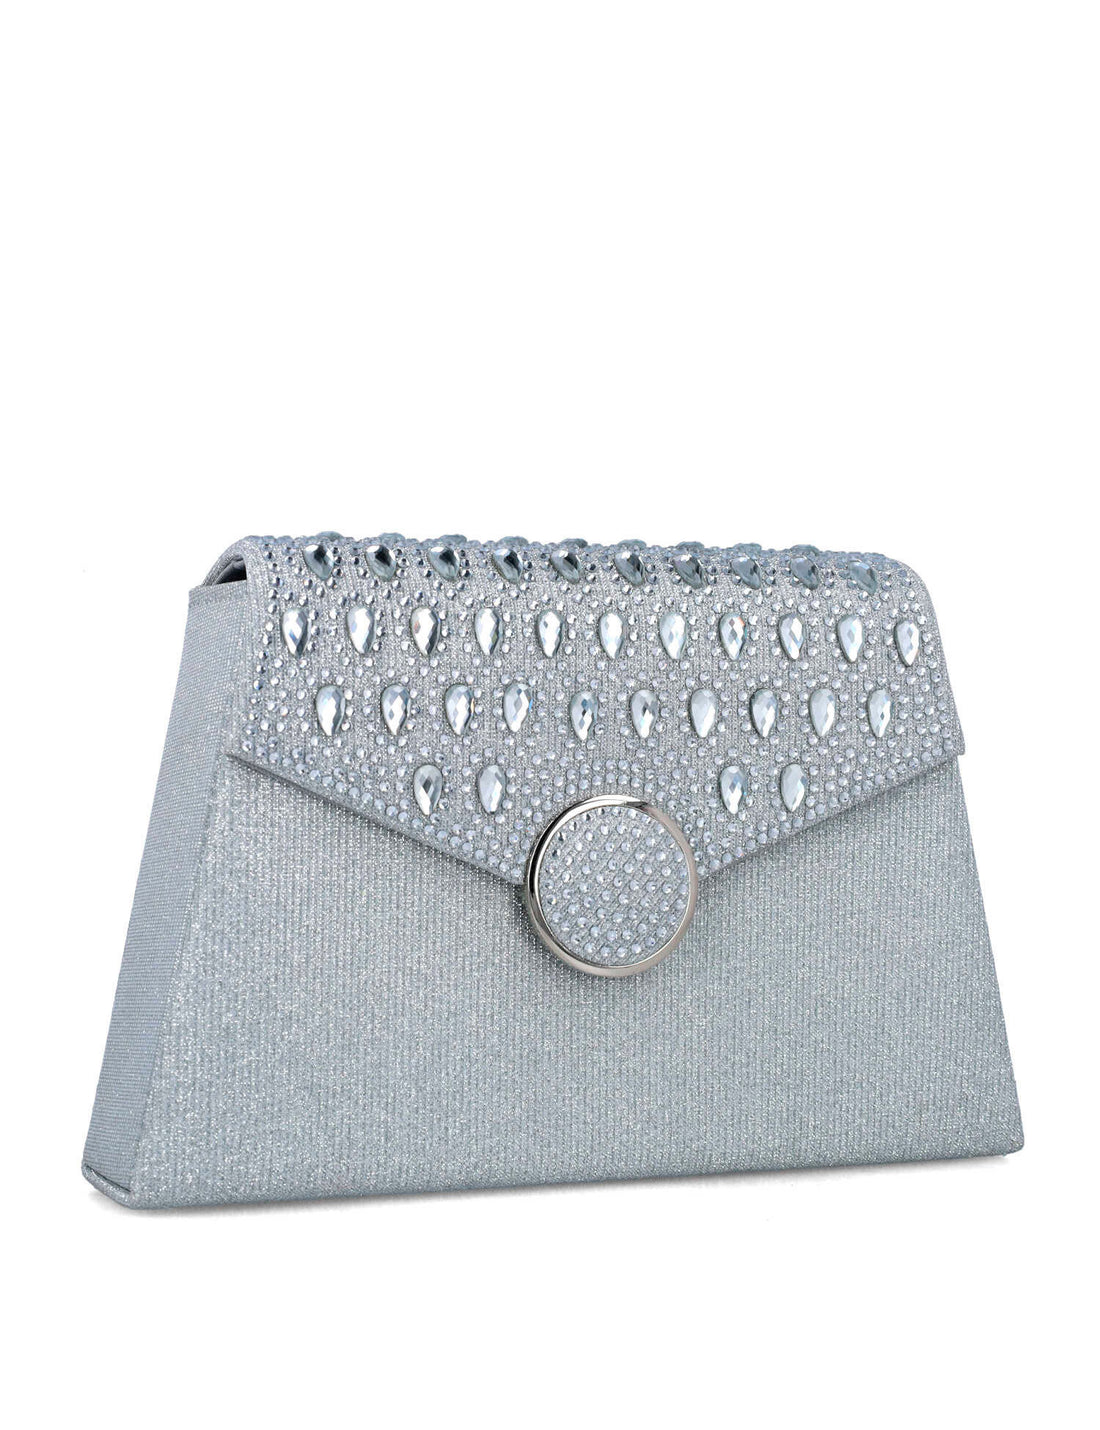 Silver Clutch With Embellished Flap_85636_09_02